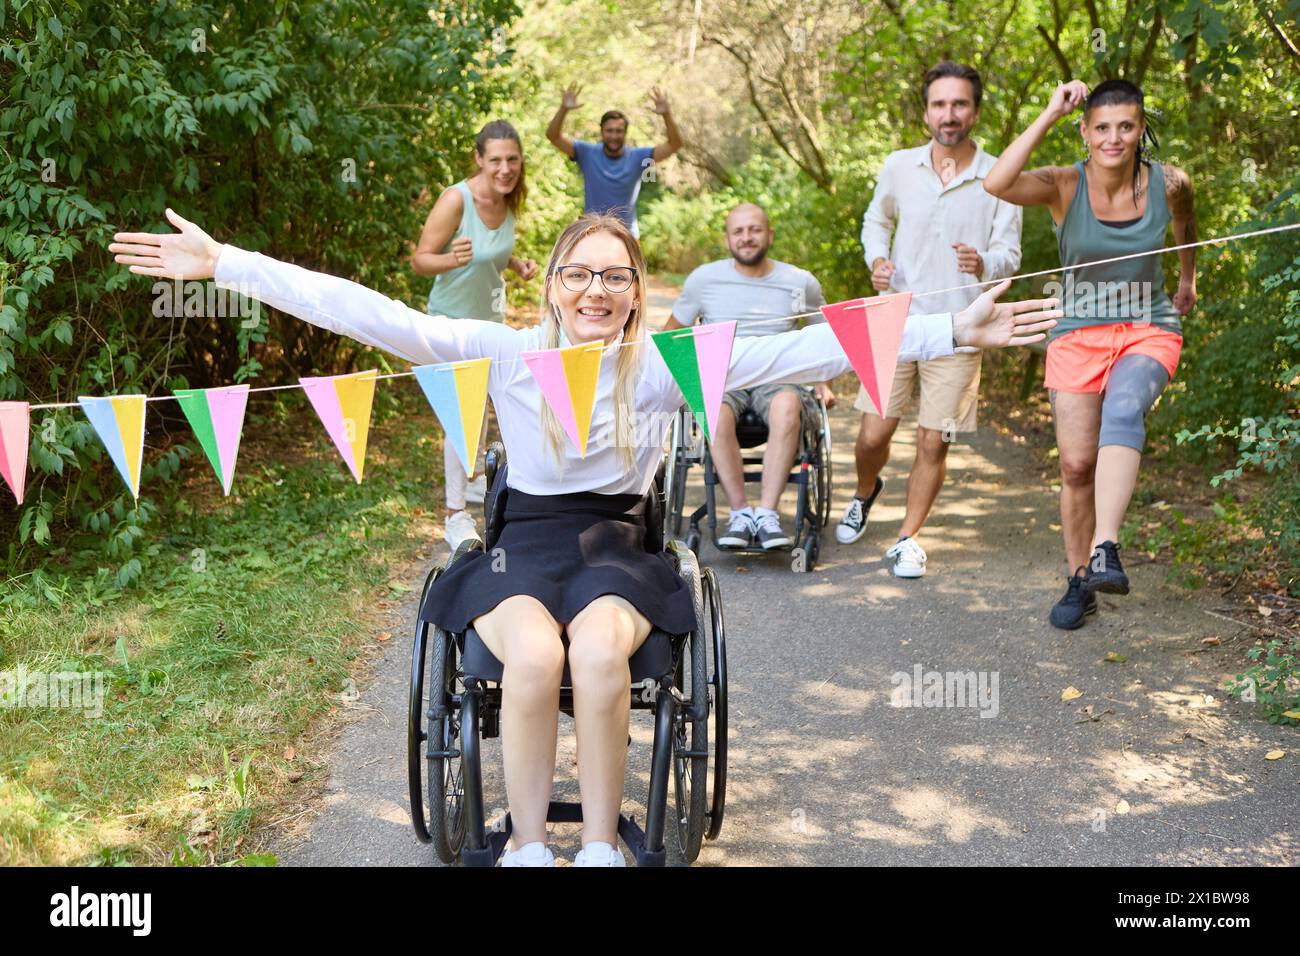 Happy group of friends enjoying an inclusive celebration outdoors, with two individuals using wheelchairs leading the fun. Stock Photo